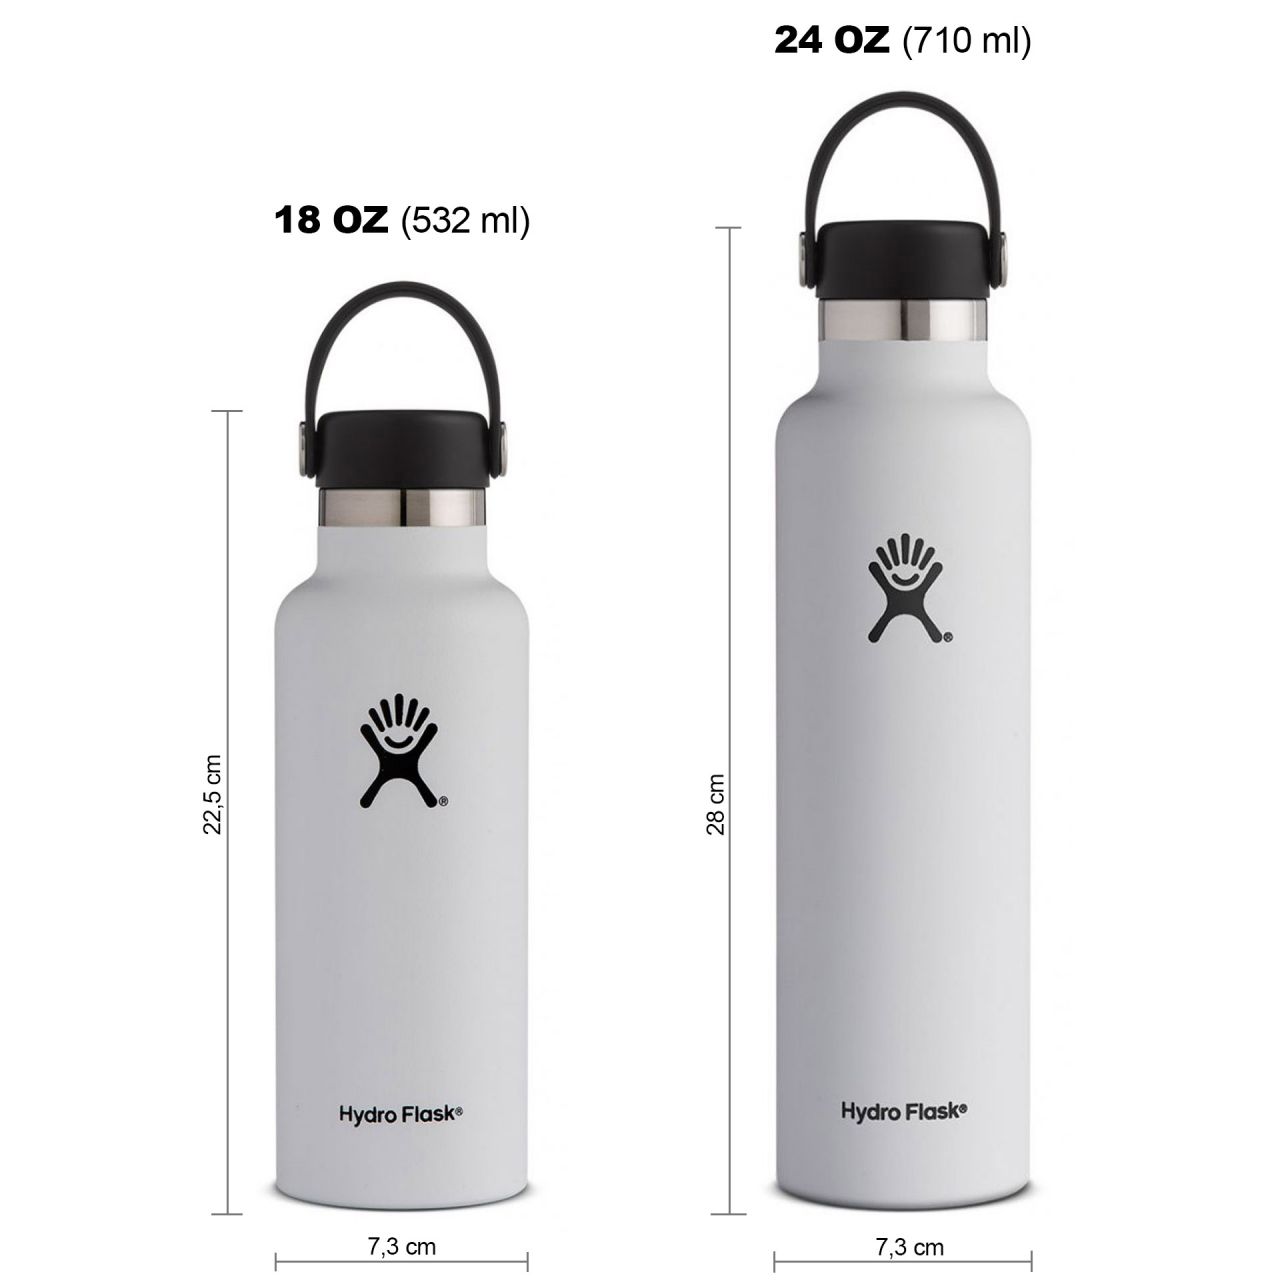 / 24 OZ 710ml Hydro Flask Hydro Flask Standard Mouth Isolierflasche 18 OZ 532ml olive 